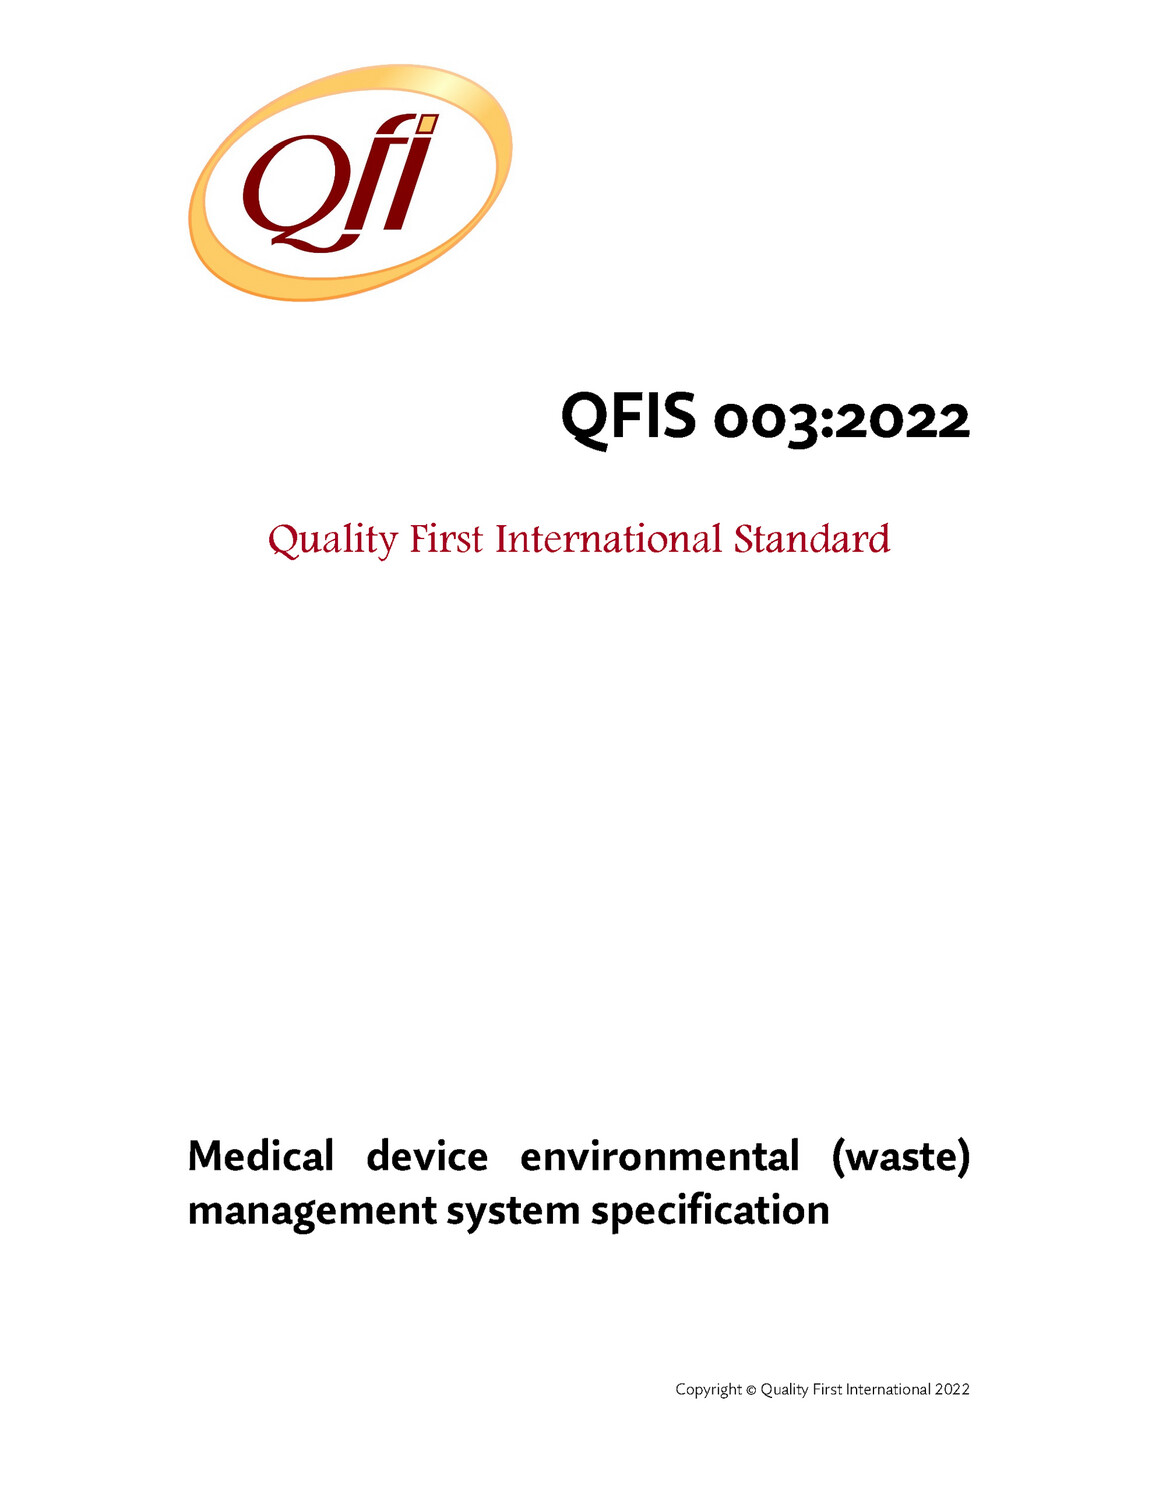 QFIS 003:2022 Medical device environmental (waste) management system specification